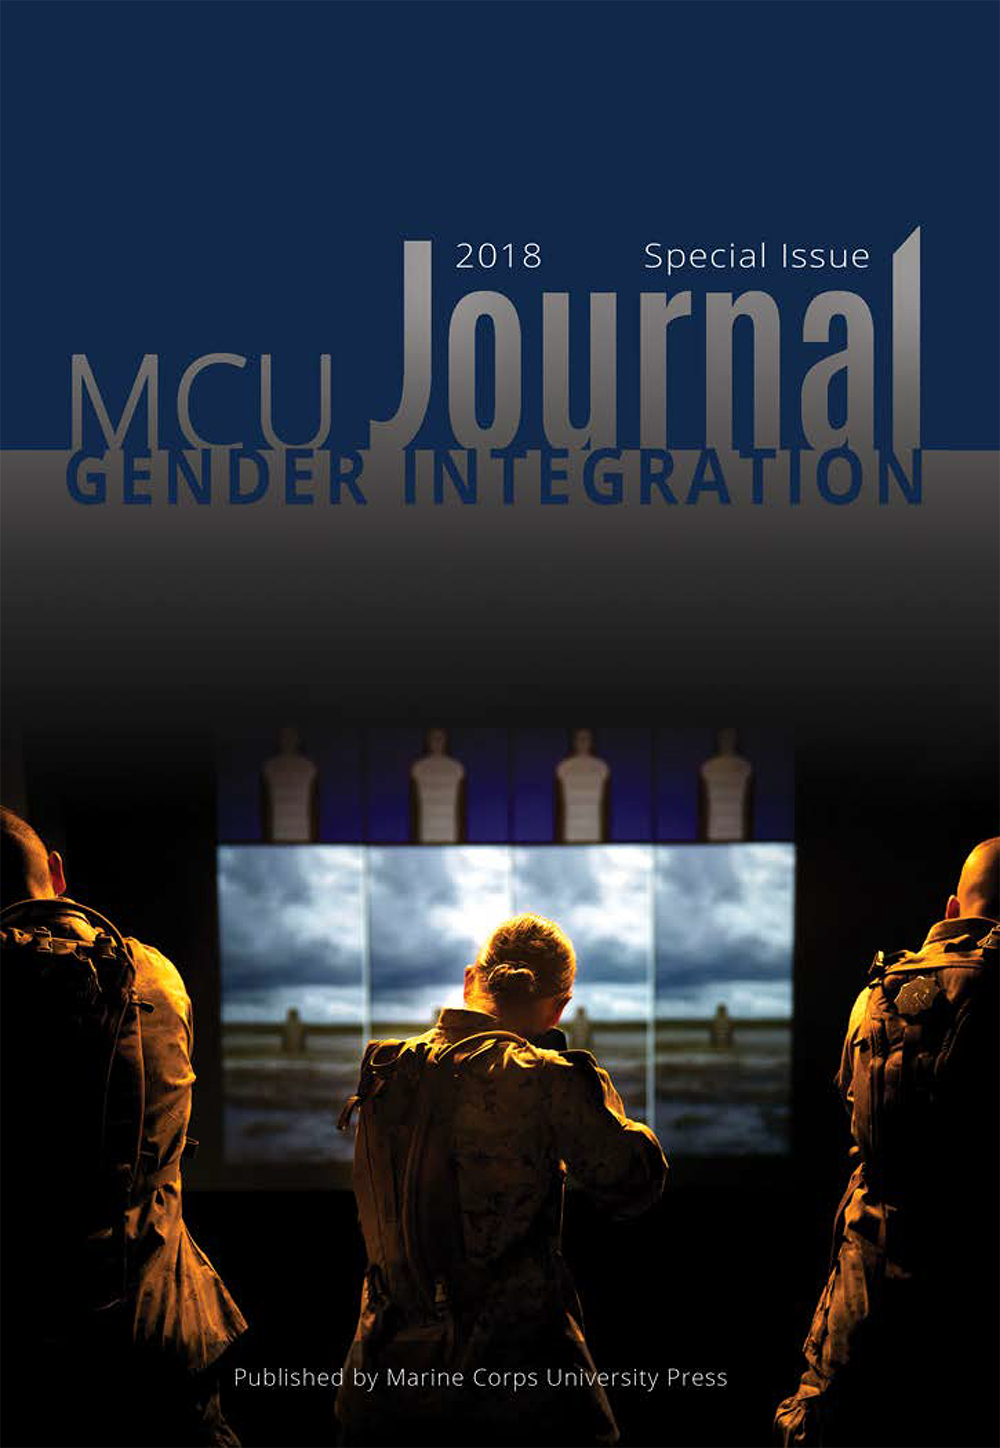 Government　Special　Corps　Marine　(2018)　Integration　Bookstore　University　Issue　Journal:　Gender